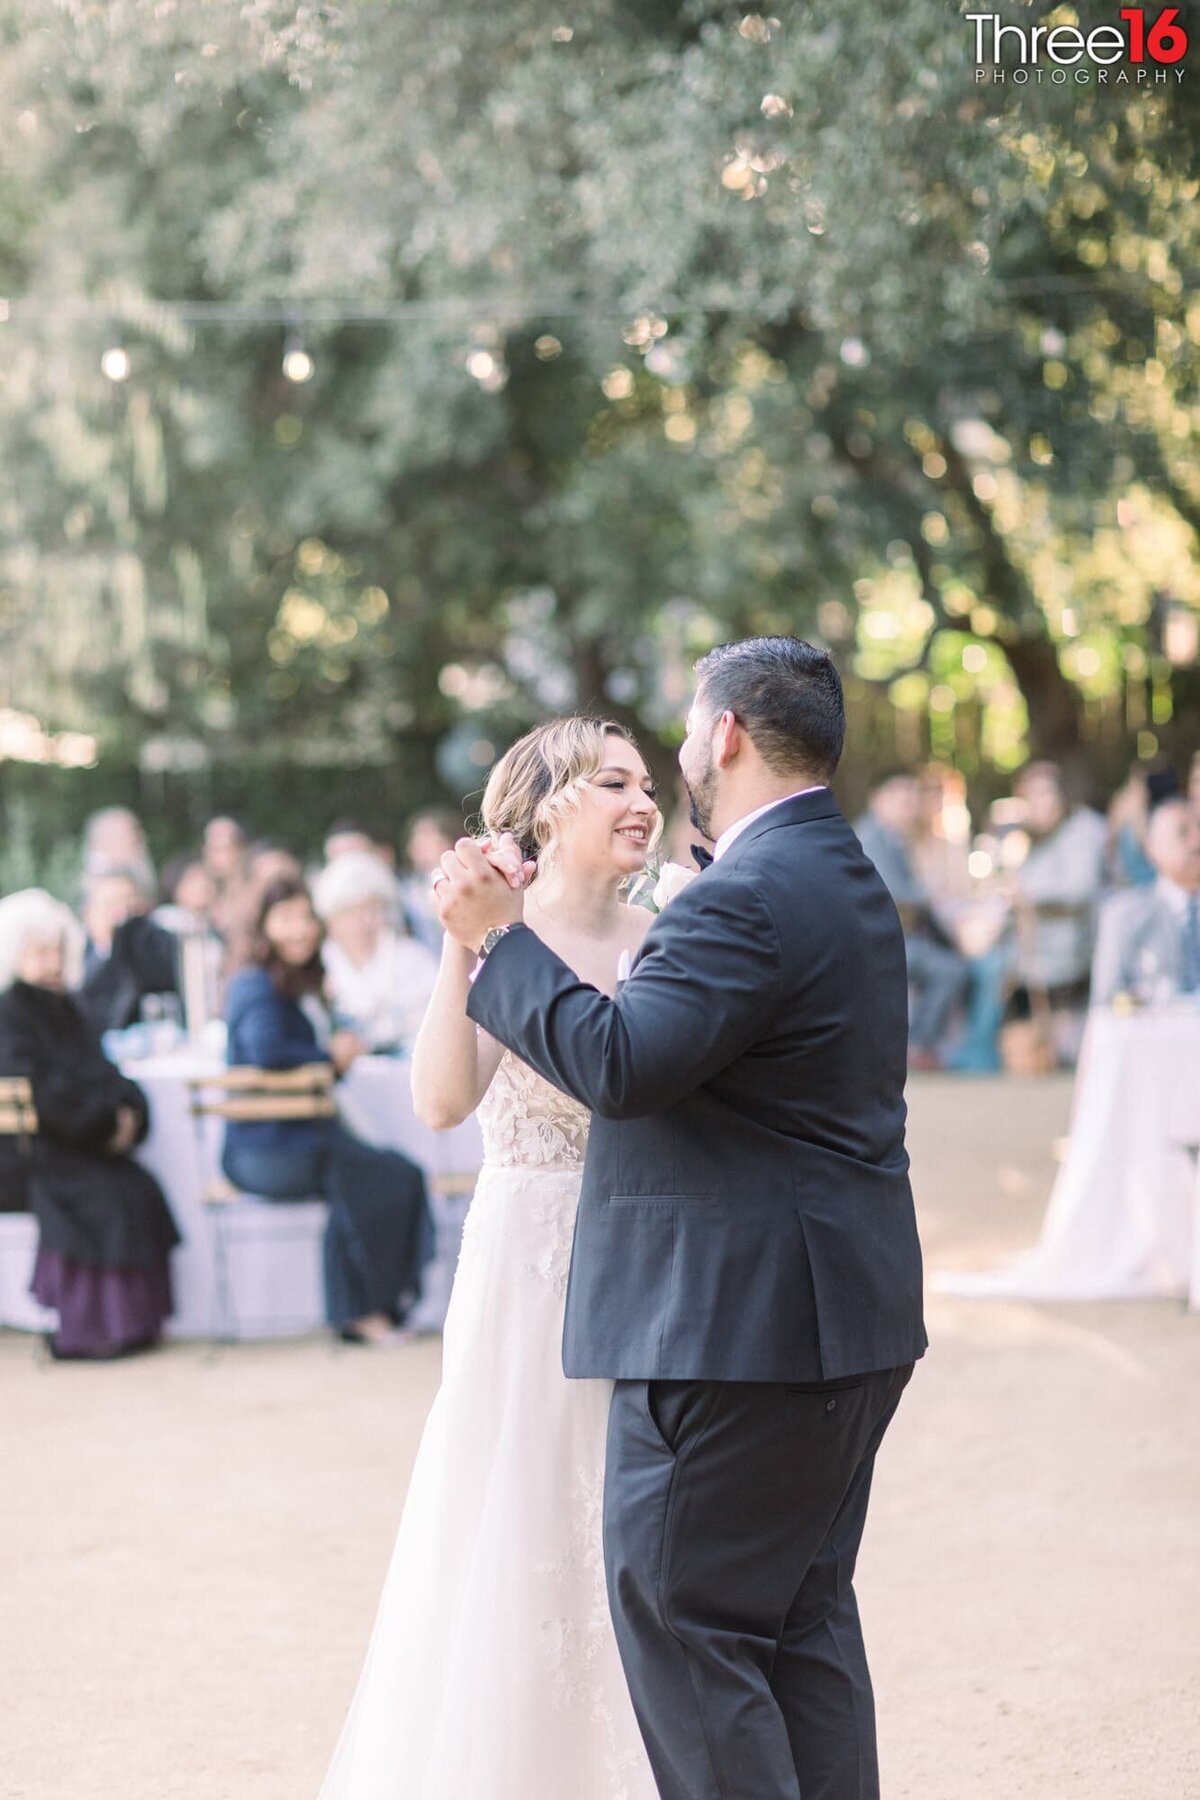 Tender moment during couple's first dance